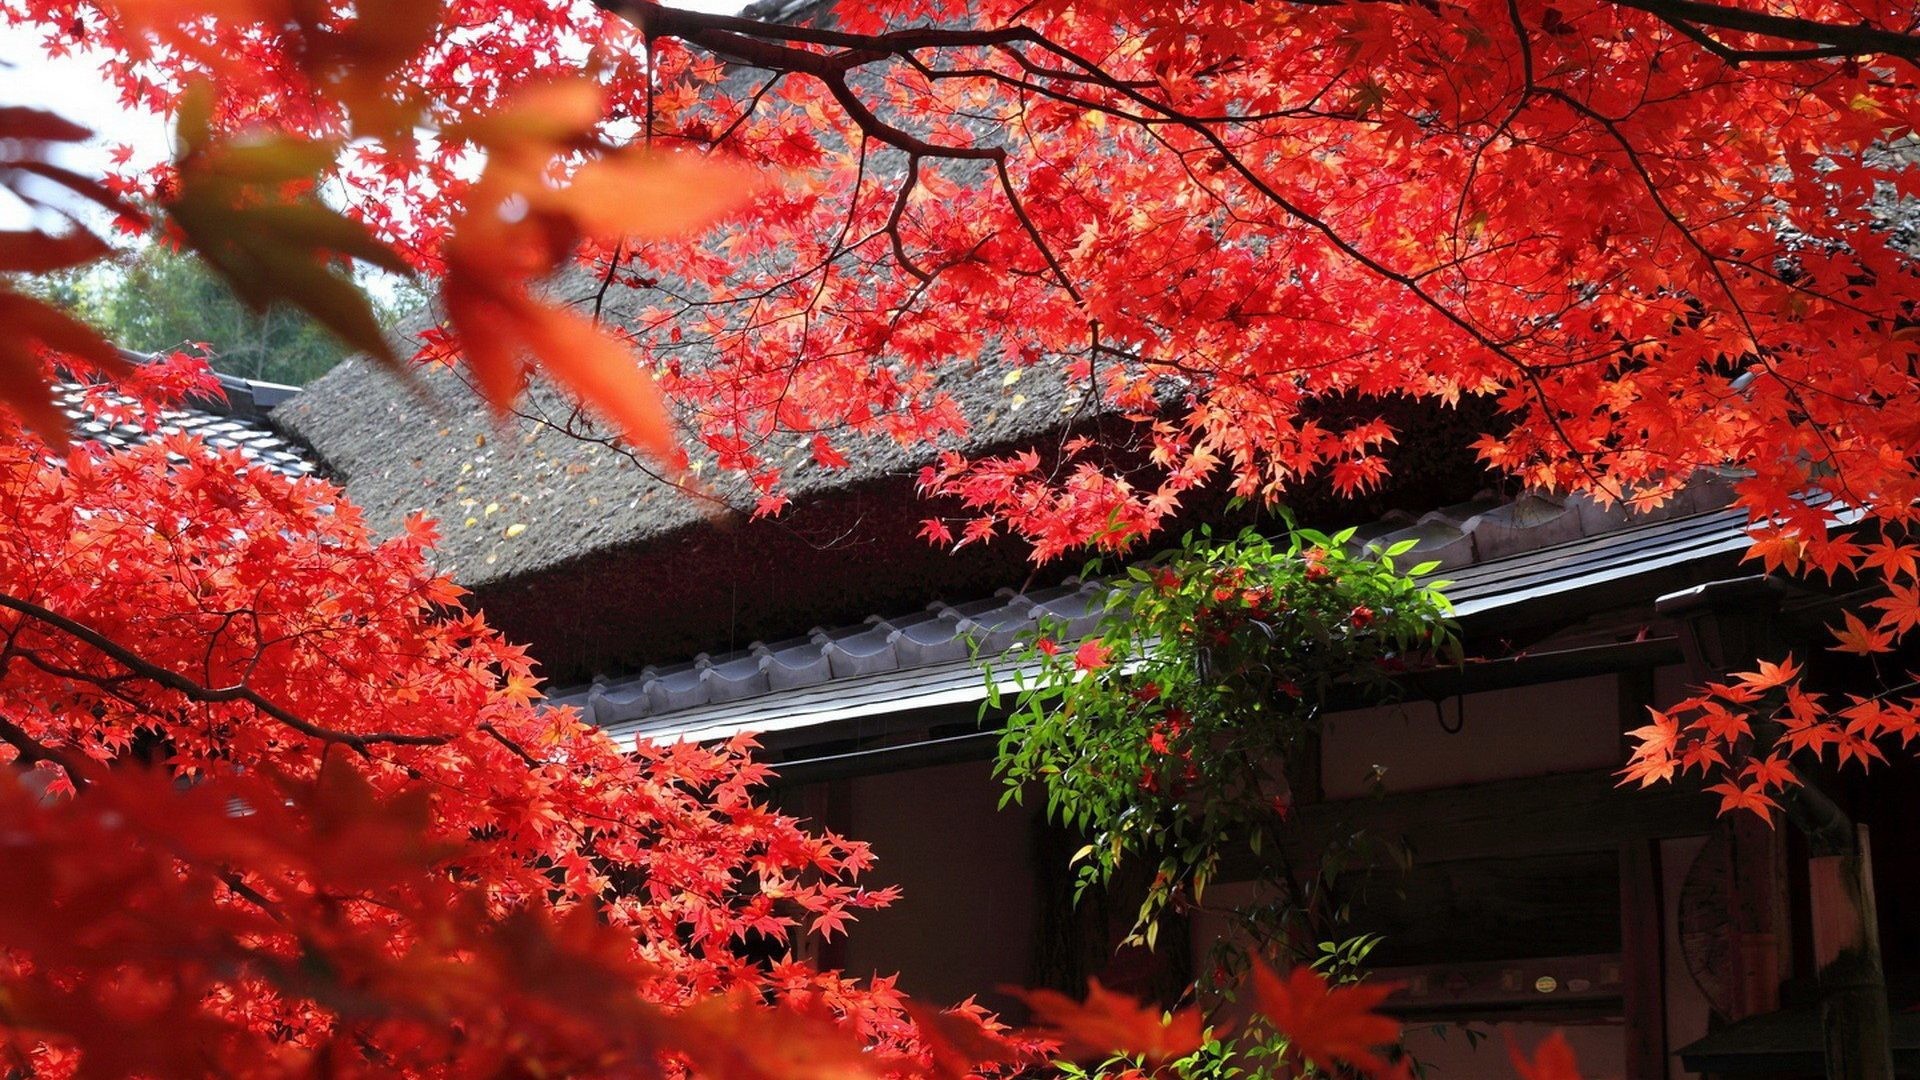 1920x1080 Leaves - Leaves Autumn Red Japan Tree Nice Nature Picture World for HD 16:9